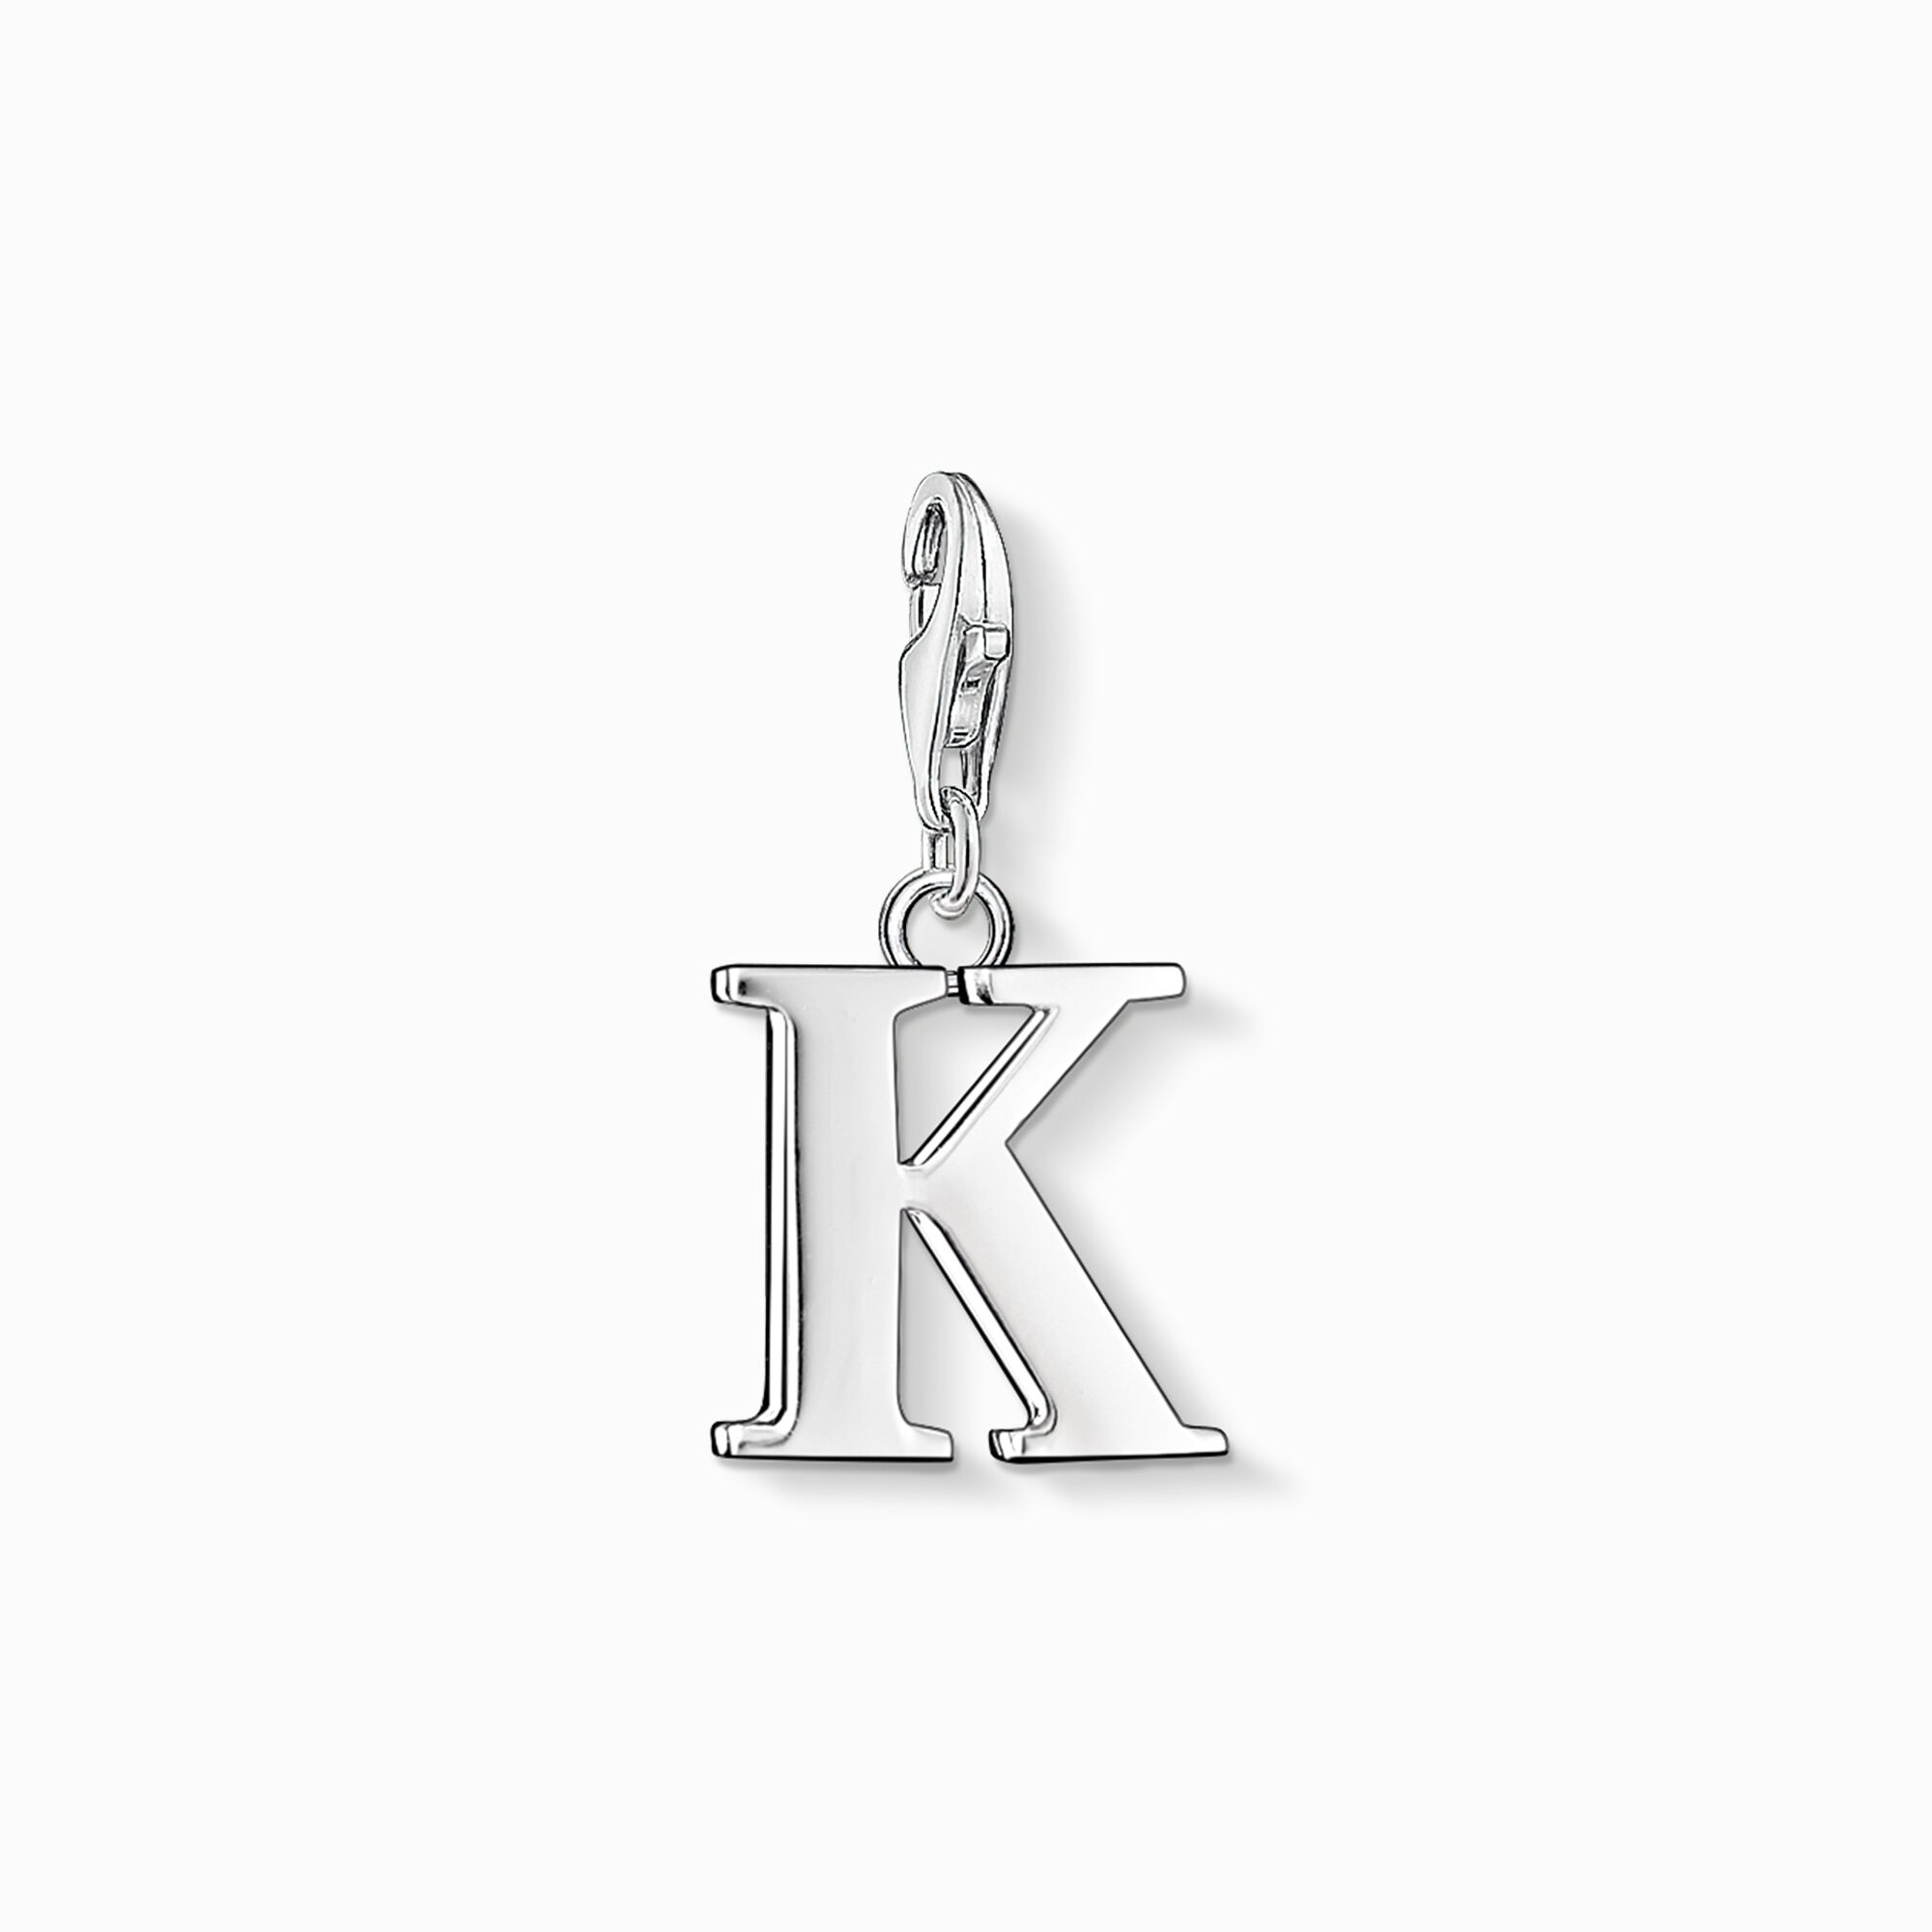 Charm pendant letter K from the Charm Club collection in the THOMAS SABO online store